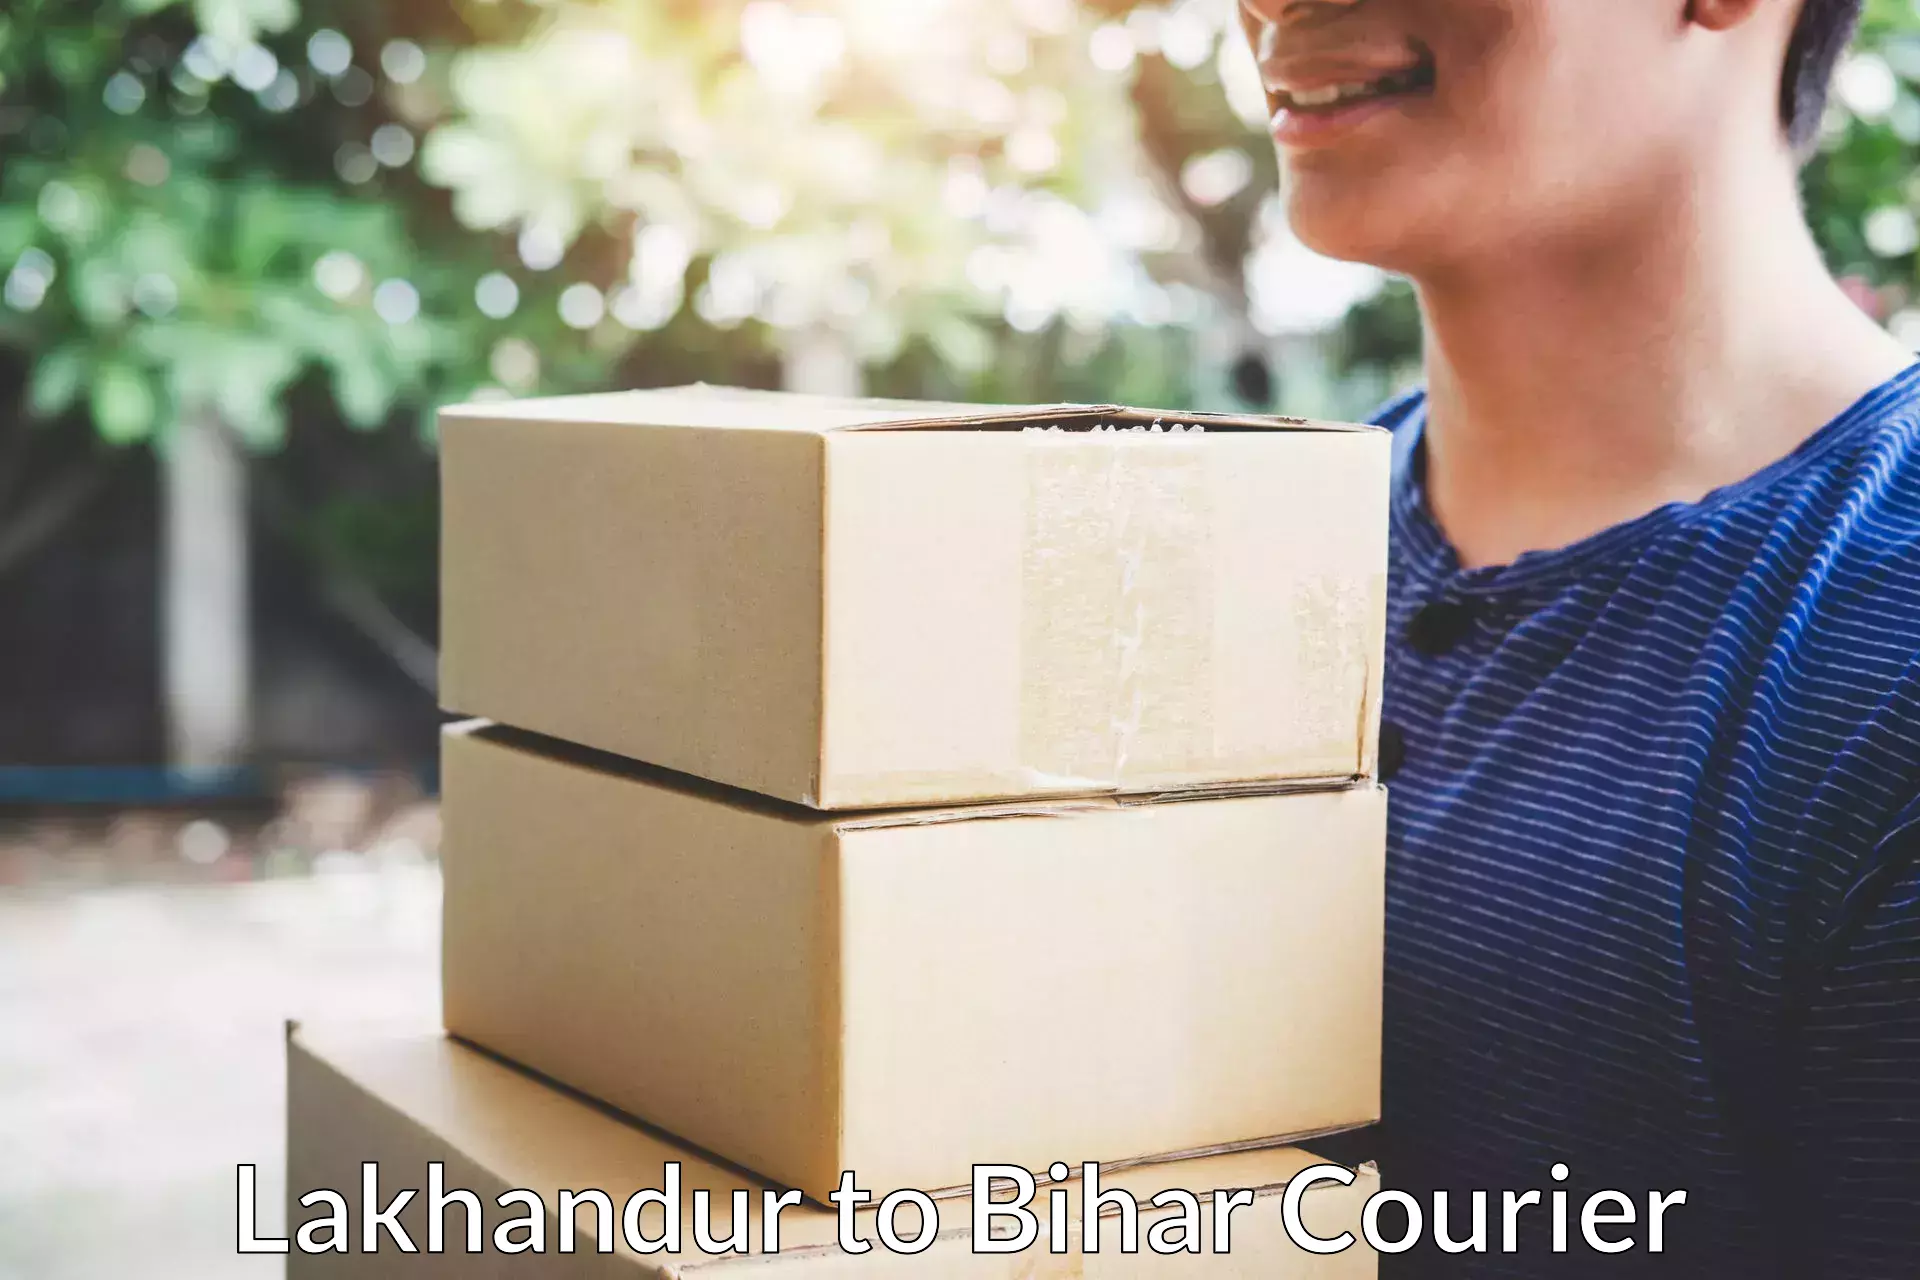 Quality relocation assistance Lakhandur to Bihar